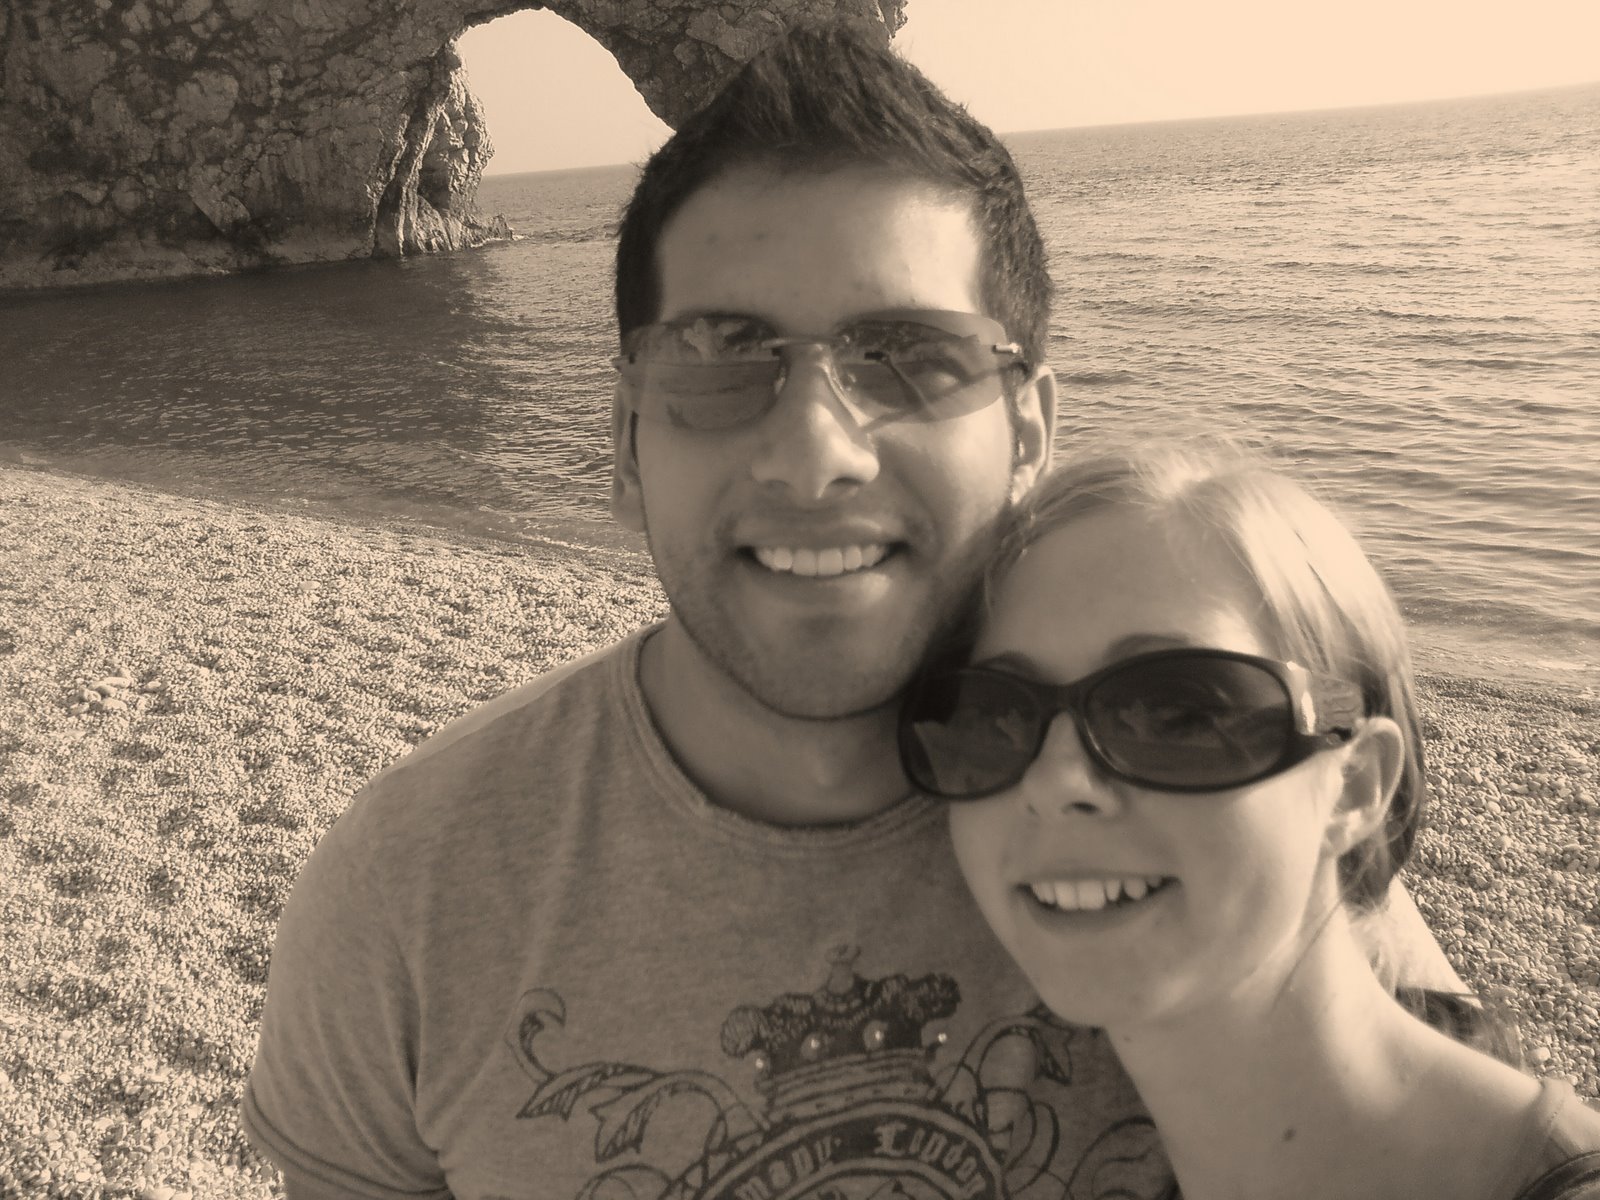 Me and my new guy on the beach at Durdle Door!